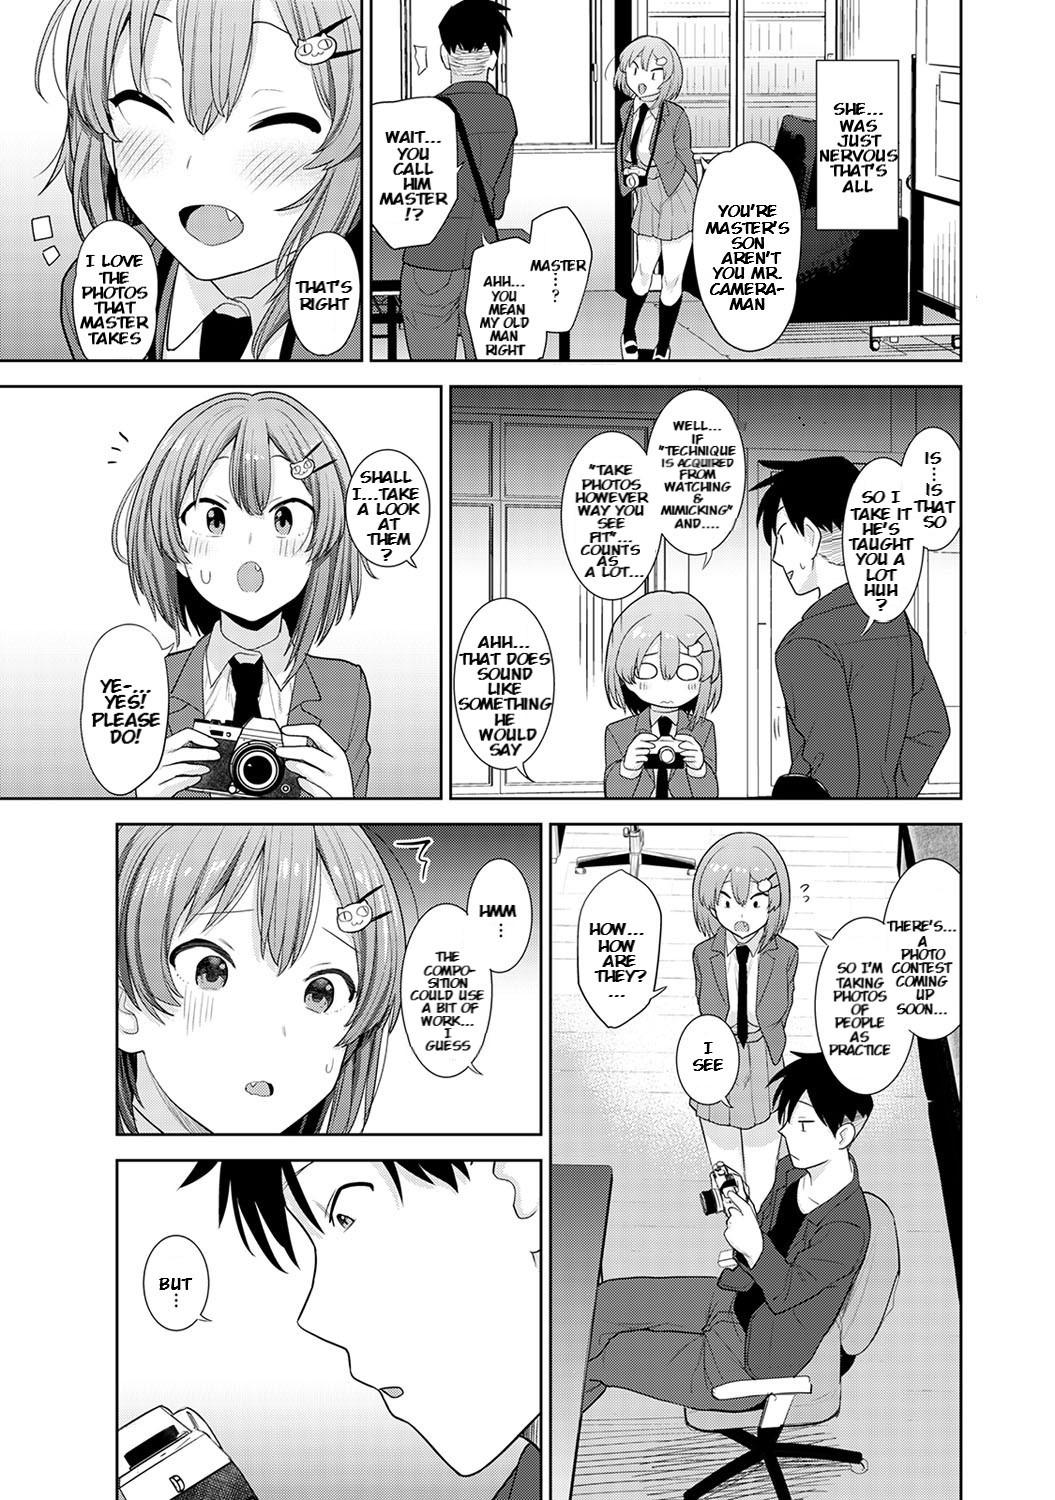 SotsuAl Cameraman to Shite Ichinenkan Joshikou no Event e Doukou Suru Koto ni Natta Hanashi | A Story About How I Ended Up Being A Yearbook Camerman at an All Girls' School For A Year Ch. 1 5